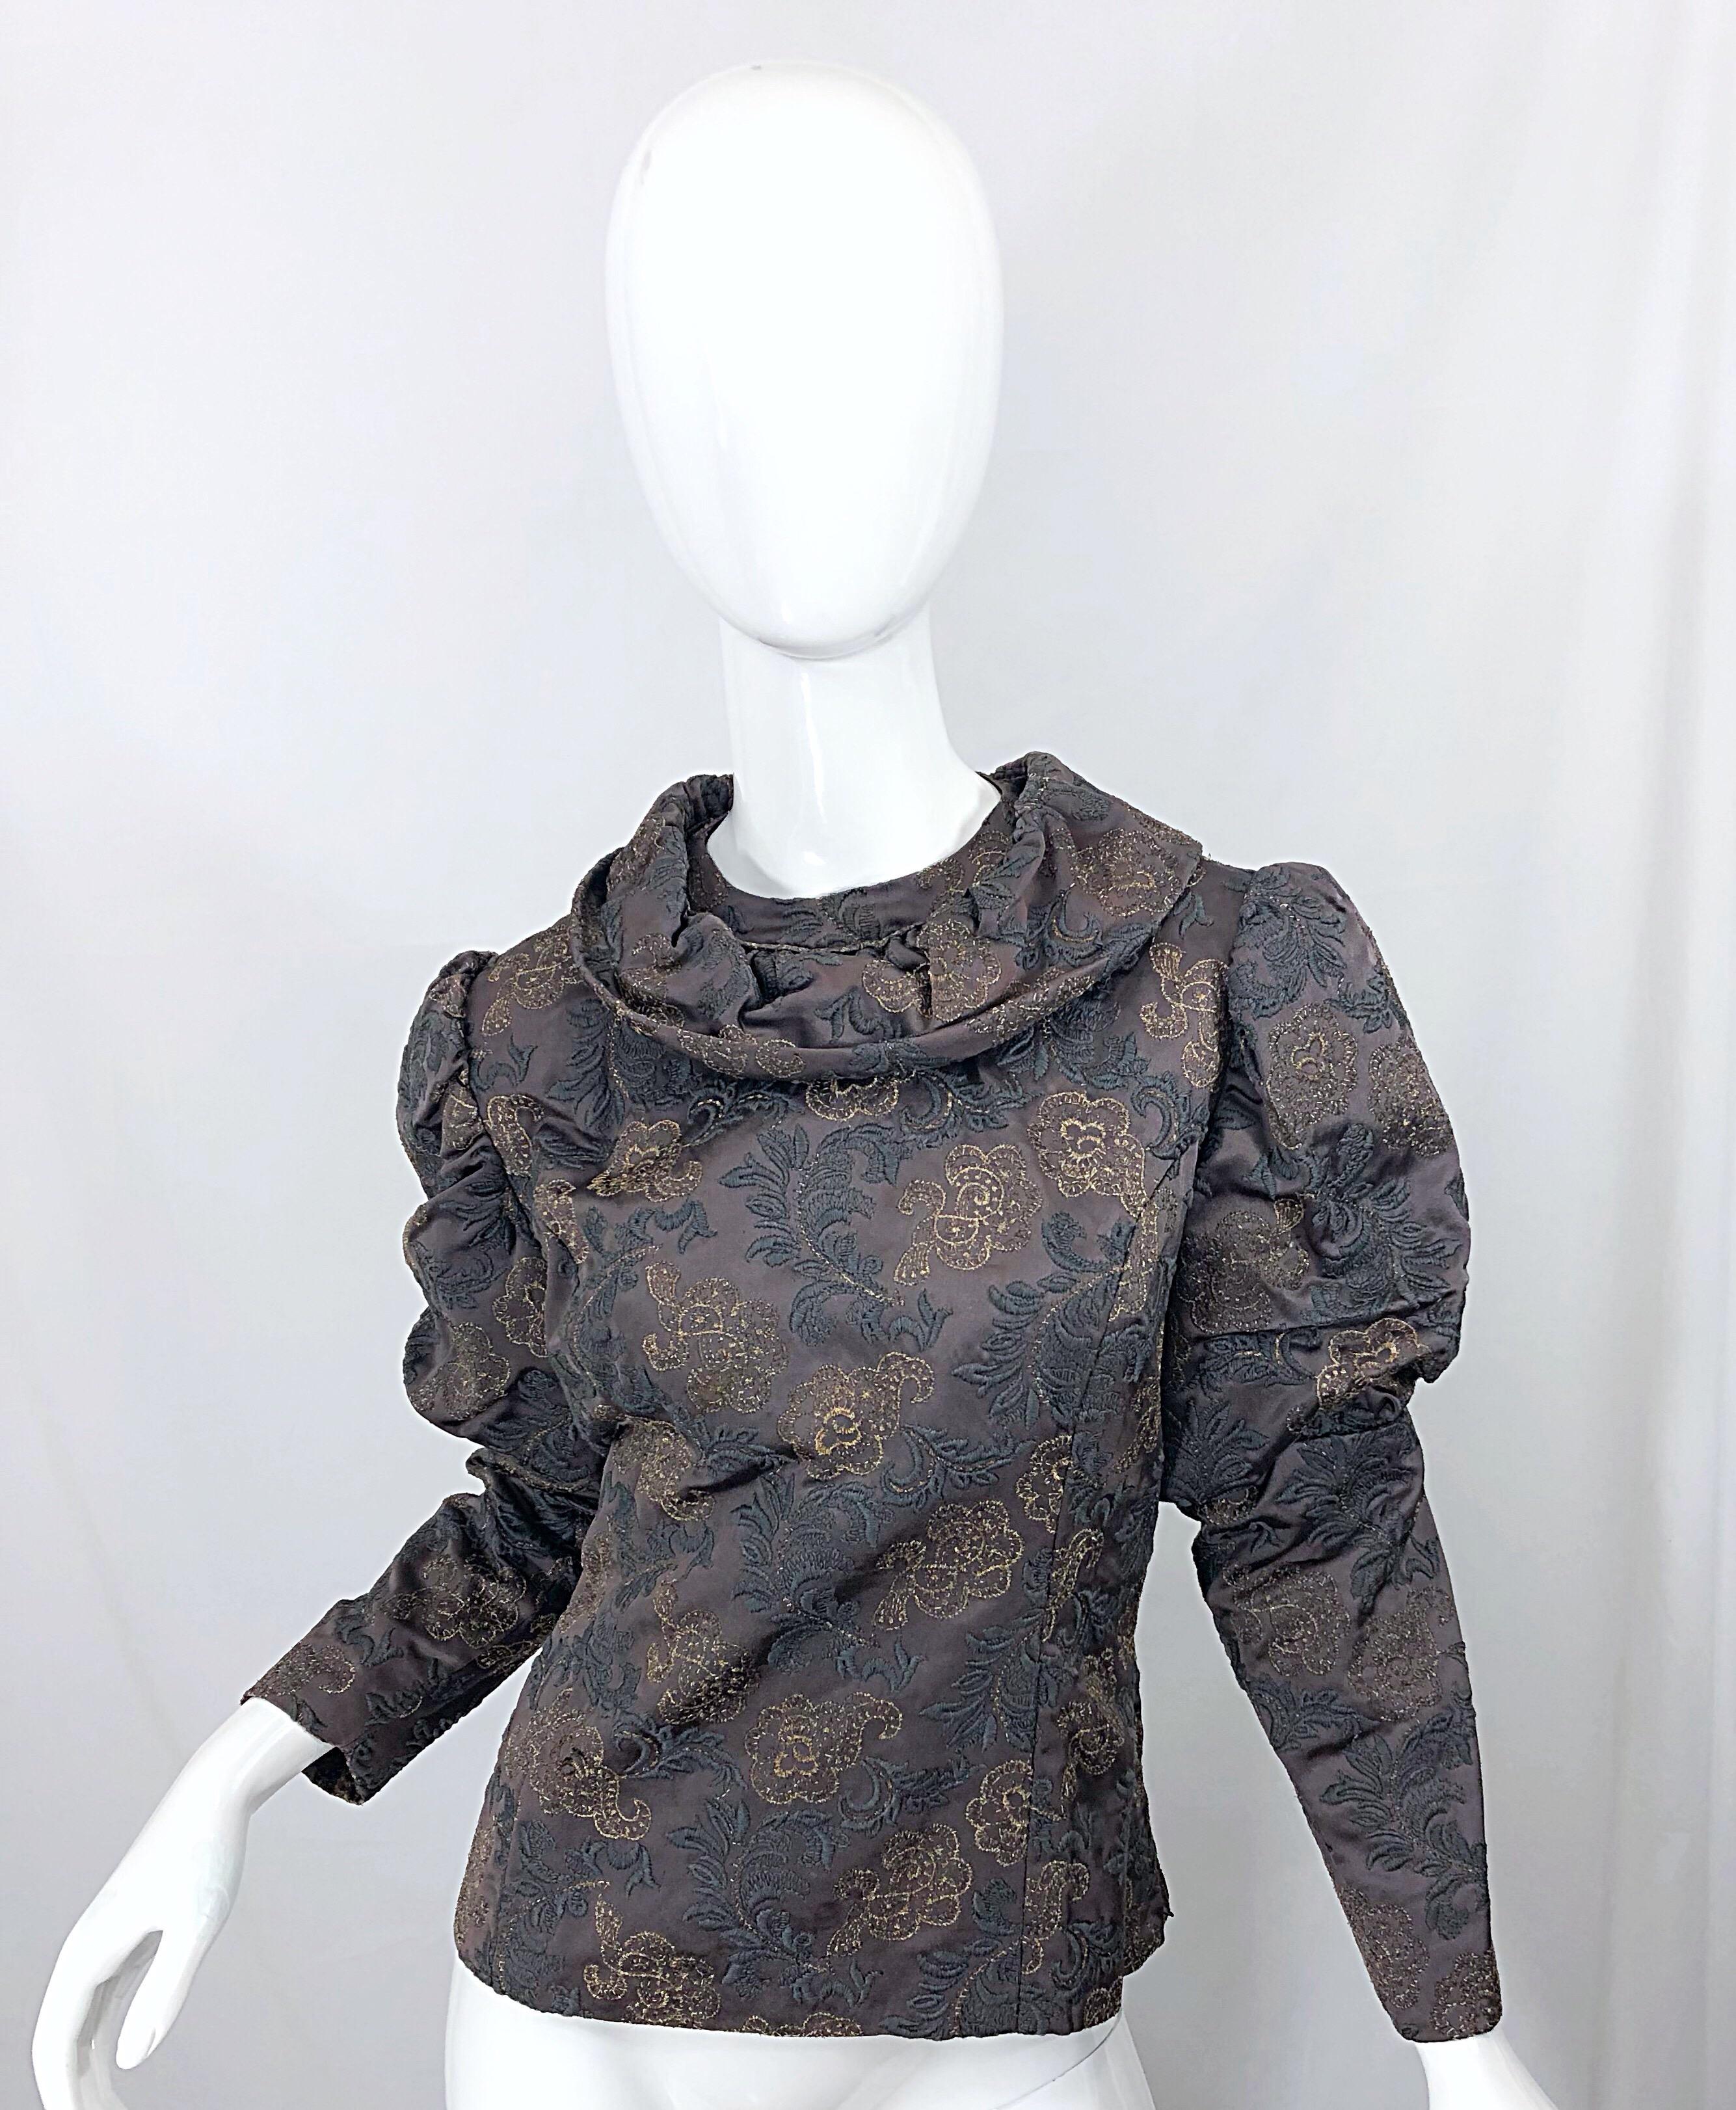 Women's 1970s Victorian Inspired Silk Brocade Taupe + Grey 70s Vintage Dress Ensemble For Sale